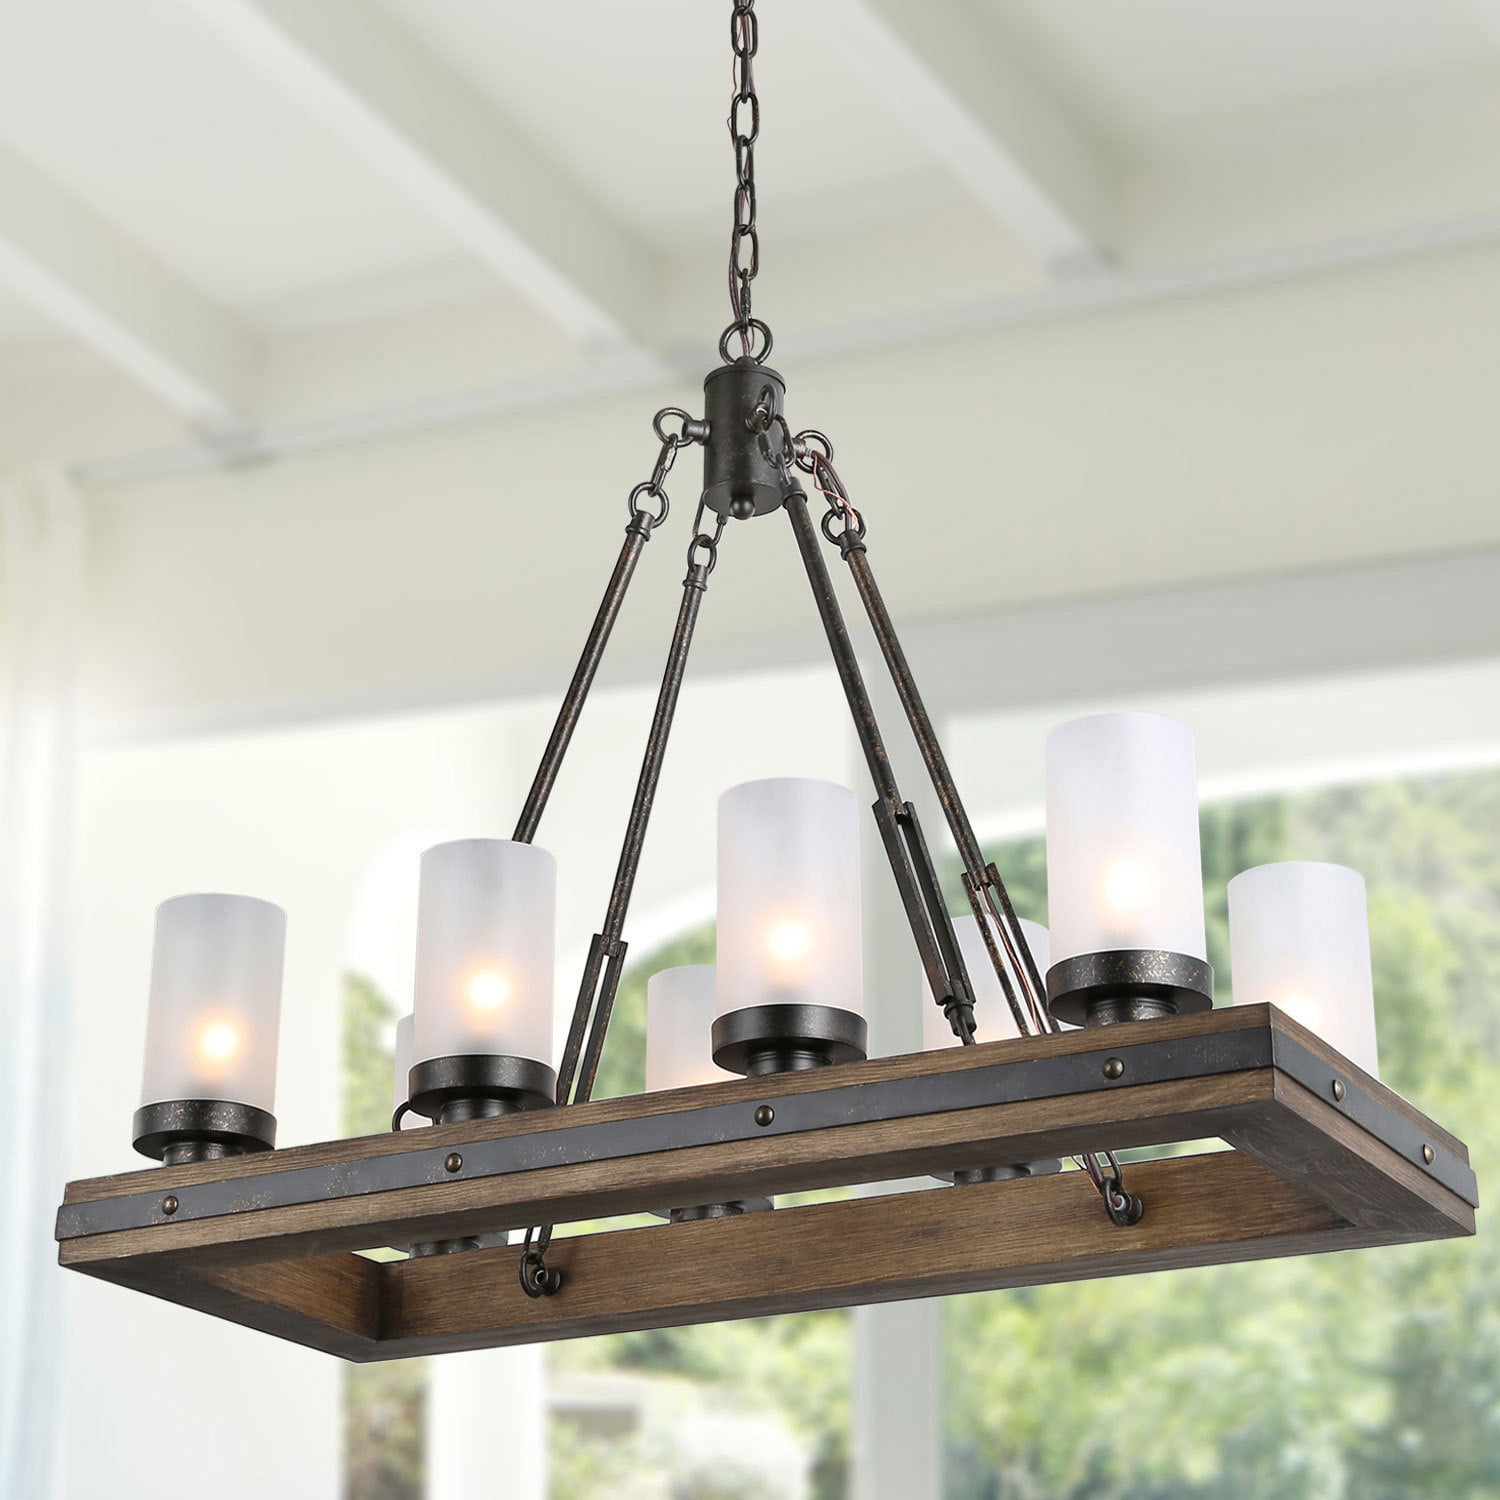 Lnc Linear Island Chandeliers For, Rustic Chandeliers For Living Room